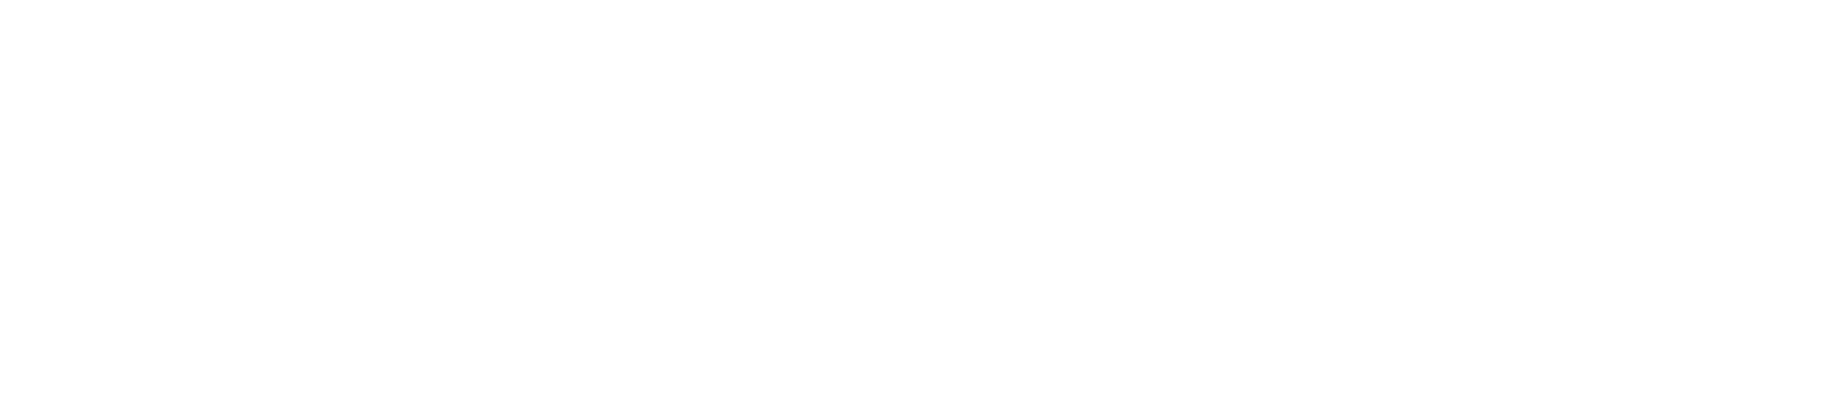 SecureDecal Powered By Jewish Federation of SPBC Logo